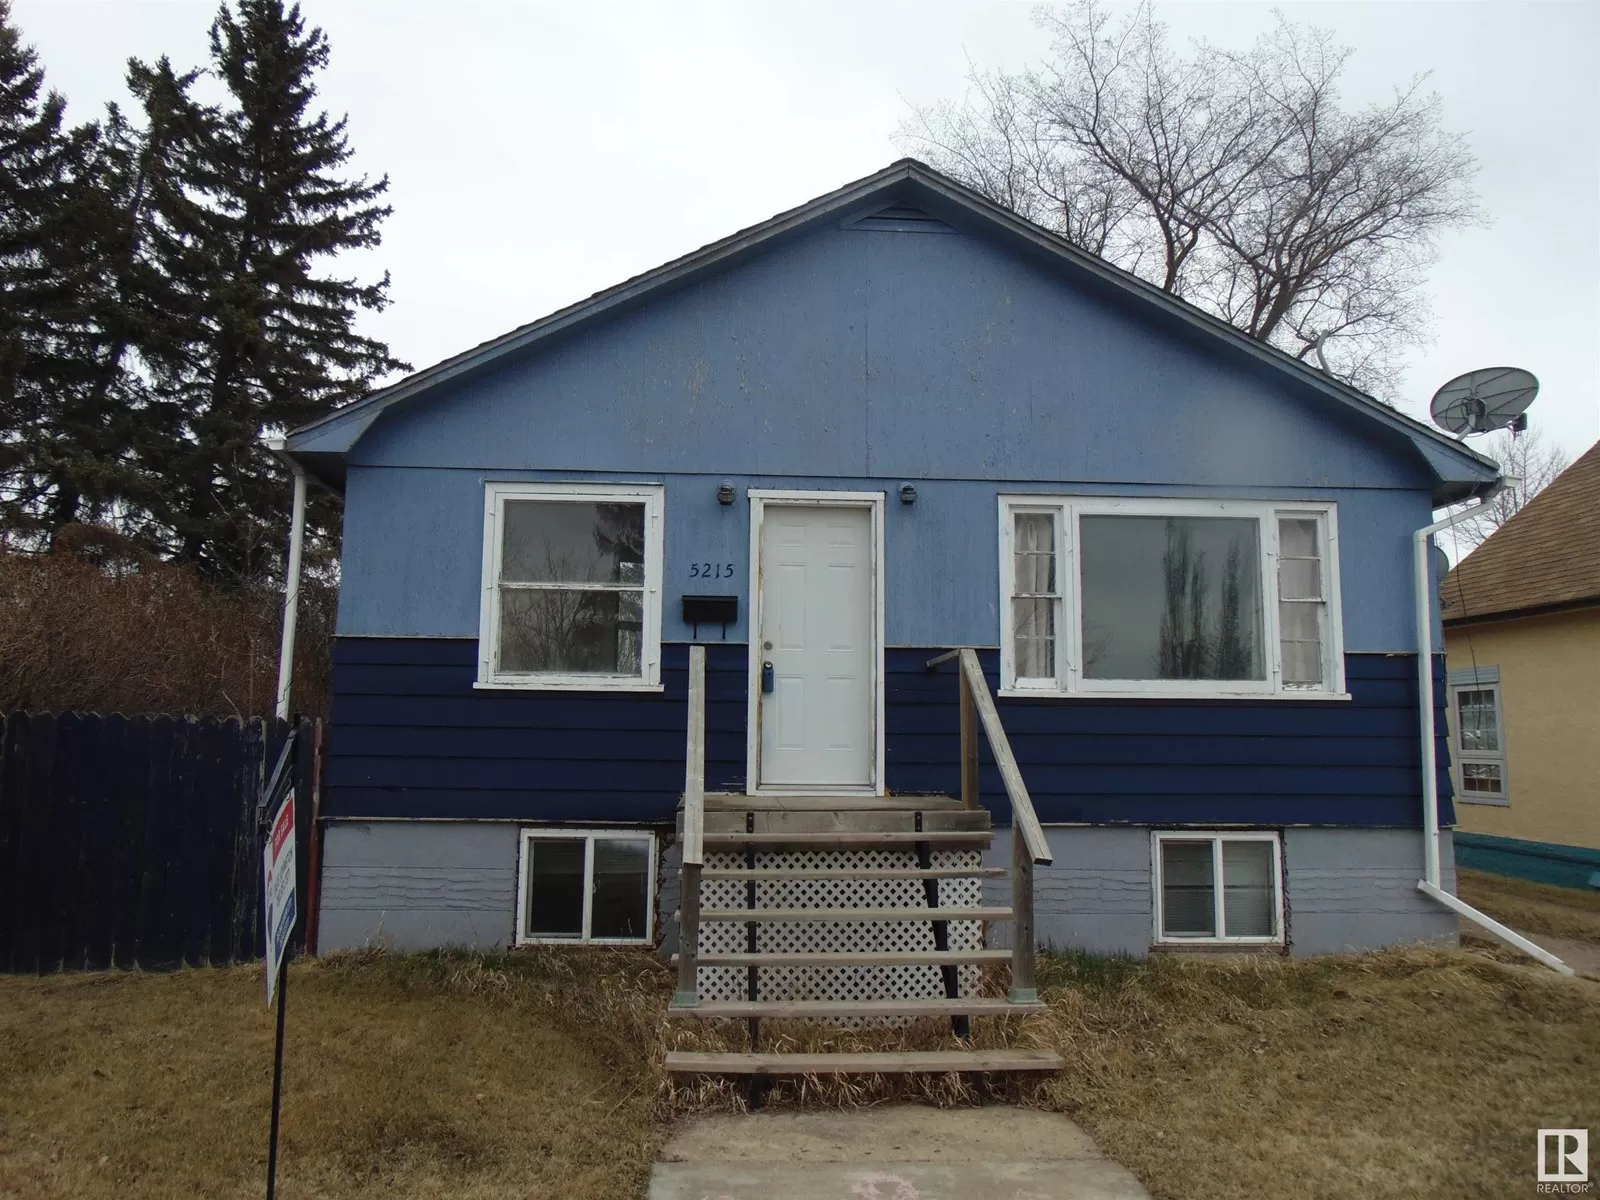 House for rent: 5215 50 St, Ryley, Alberta T0B 4A0